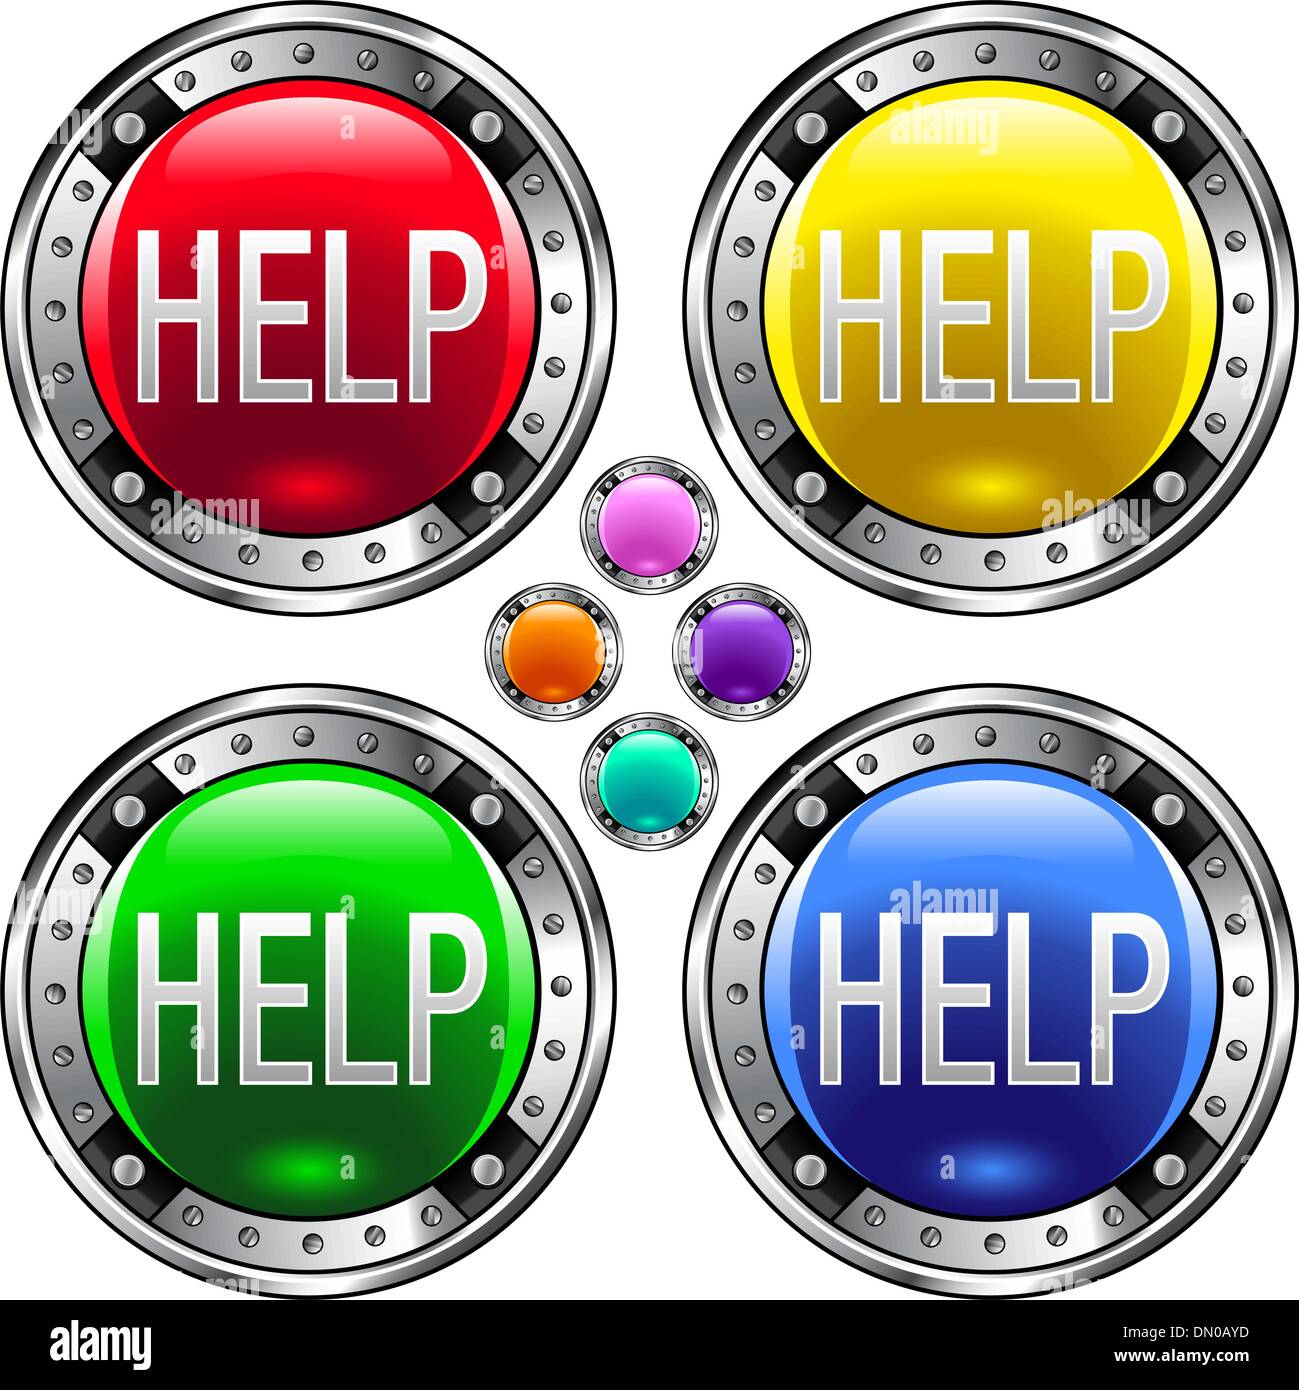 Help colorful button Stock Vector